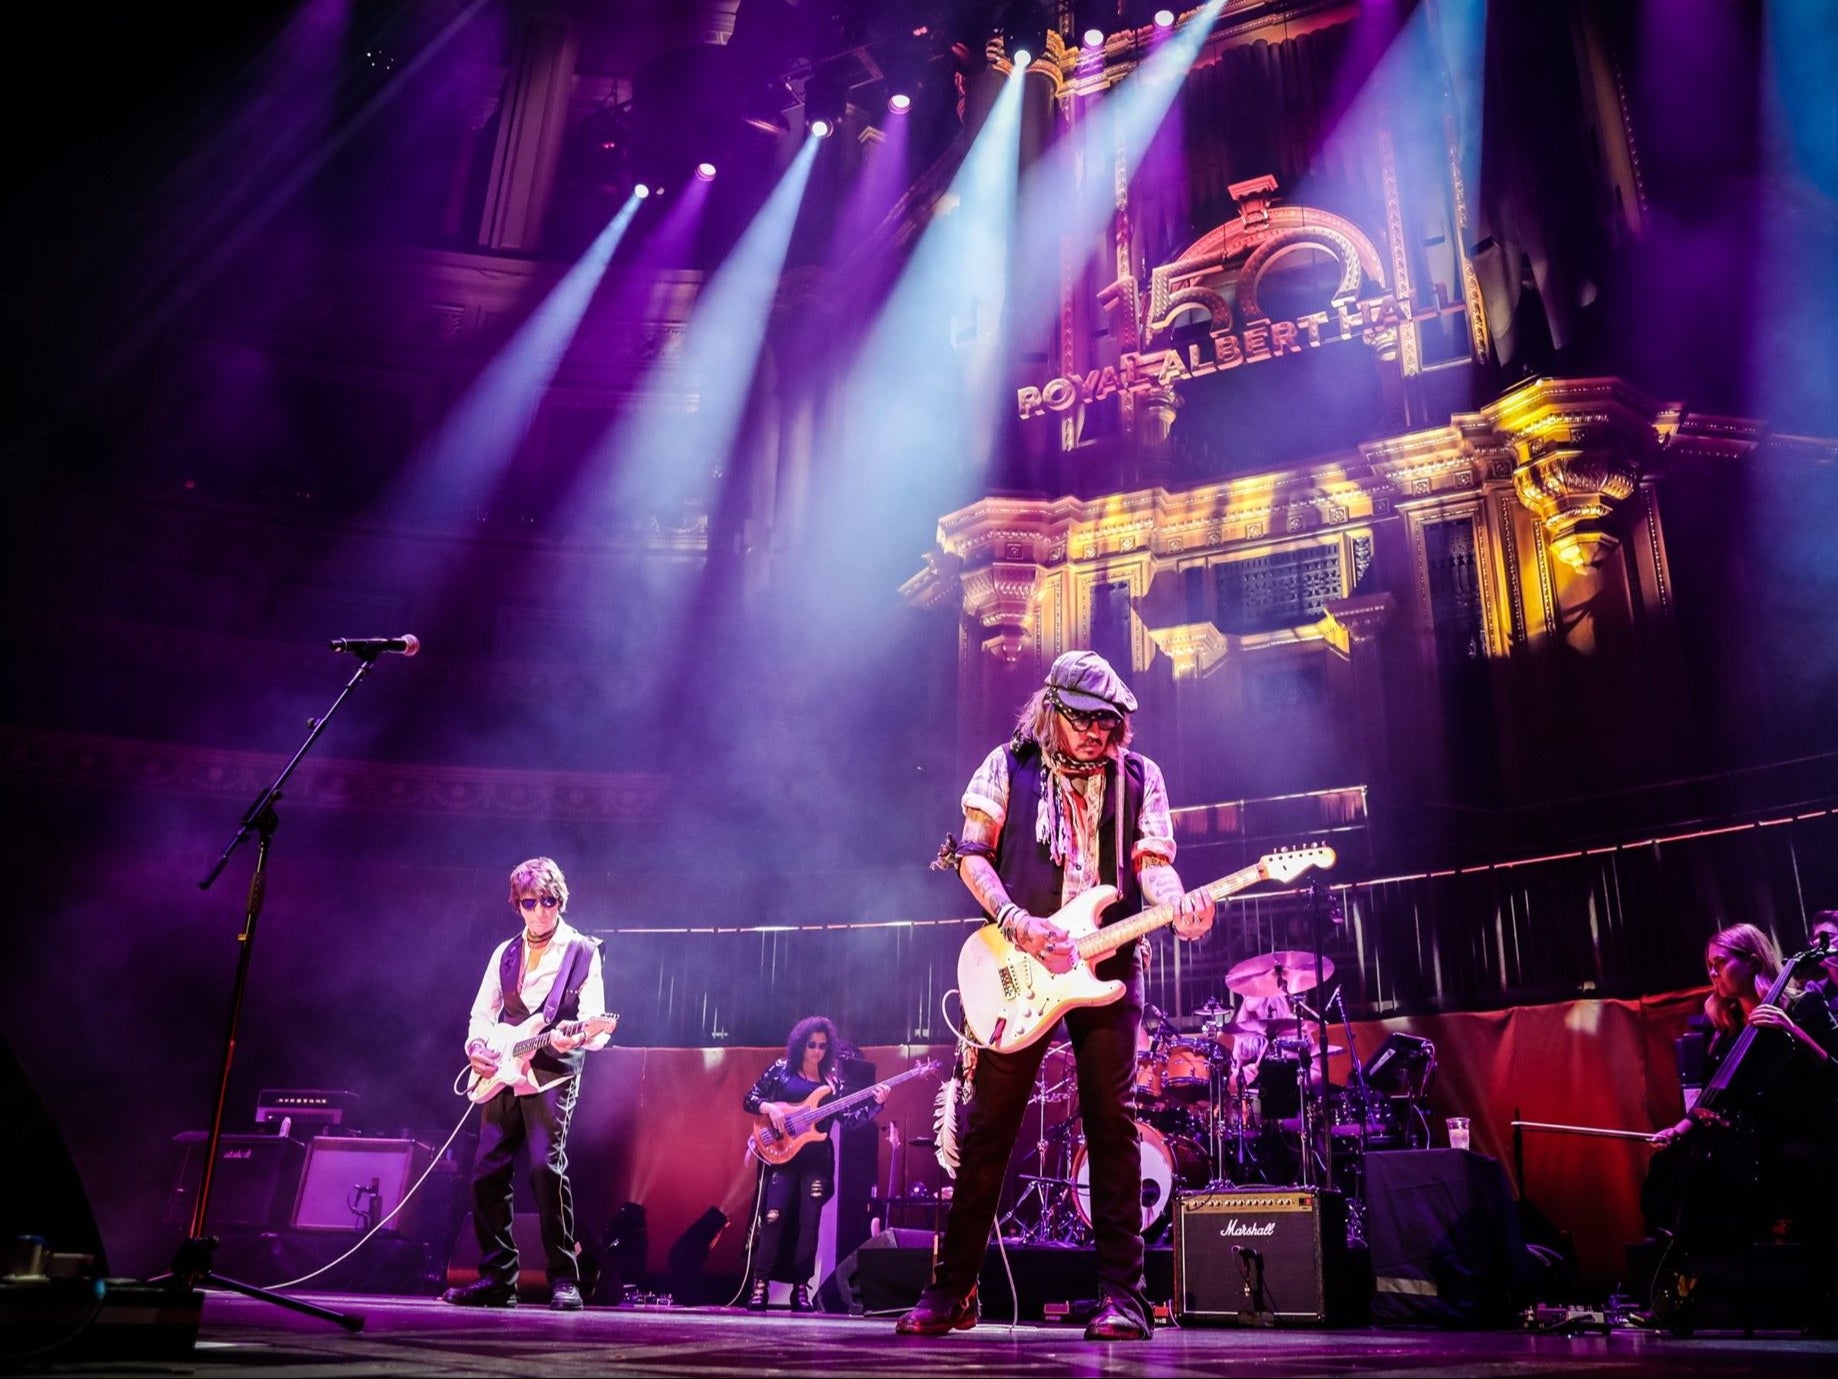 Jeff Beck and Johnny Depp performing at the Royal Albert Hall in London